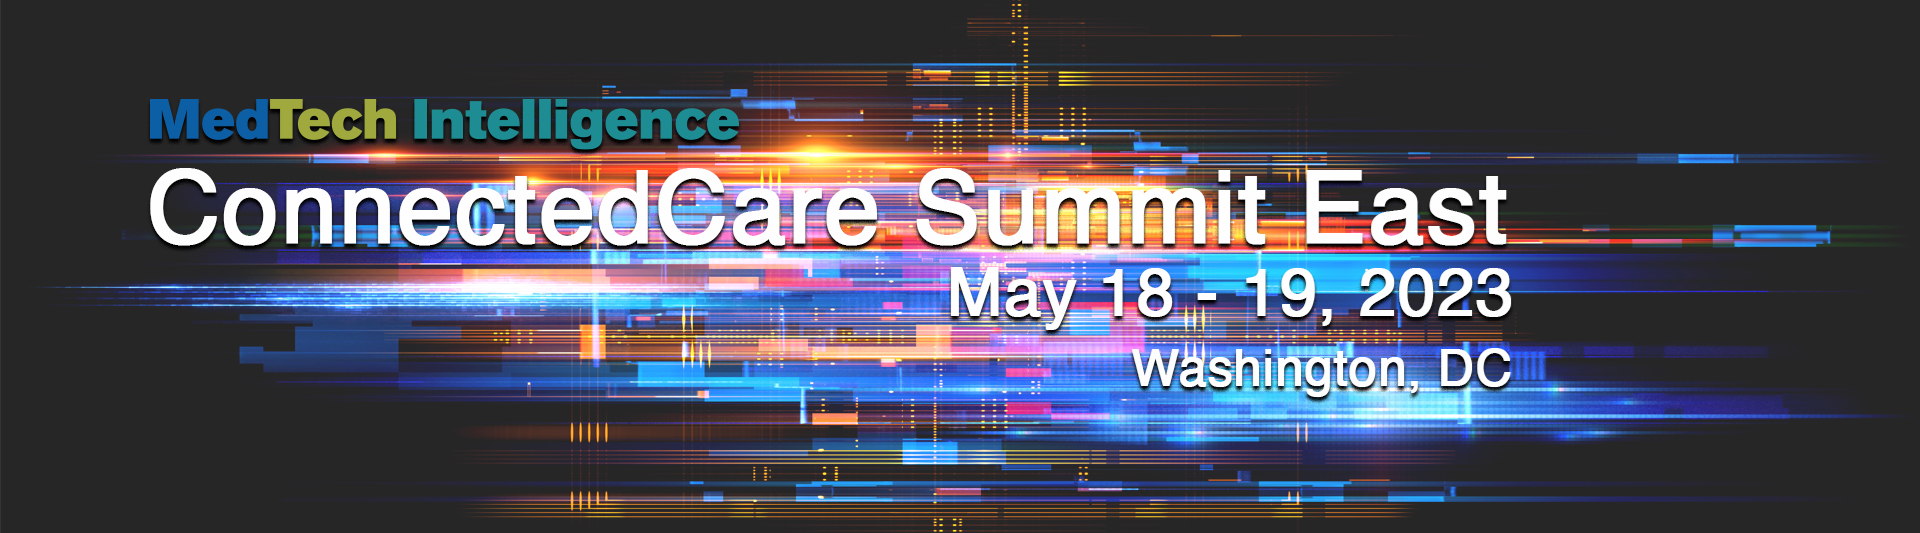 ConnectedCare Summit East